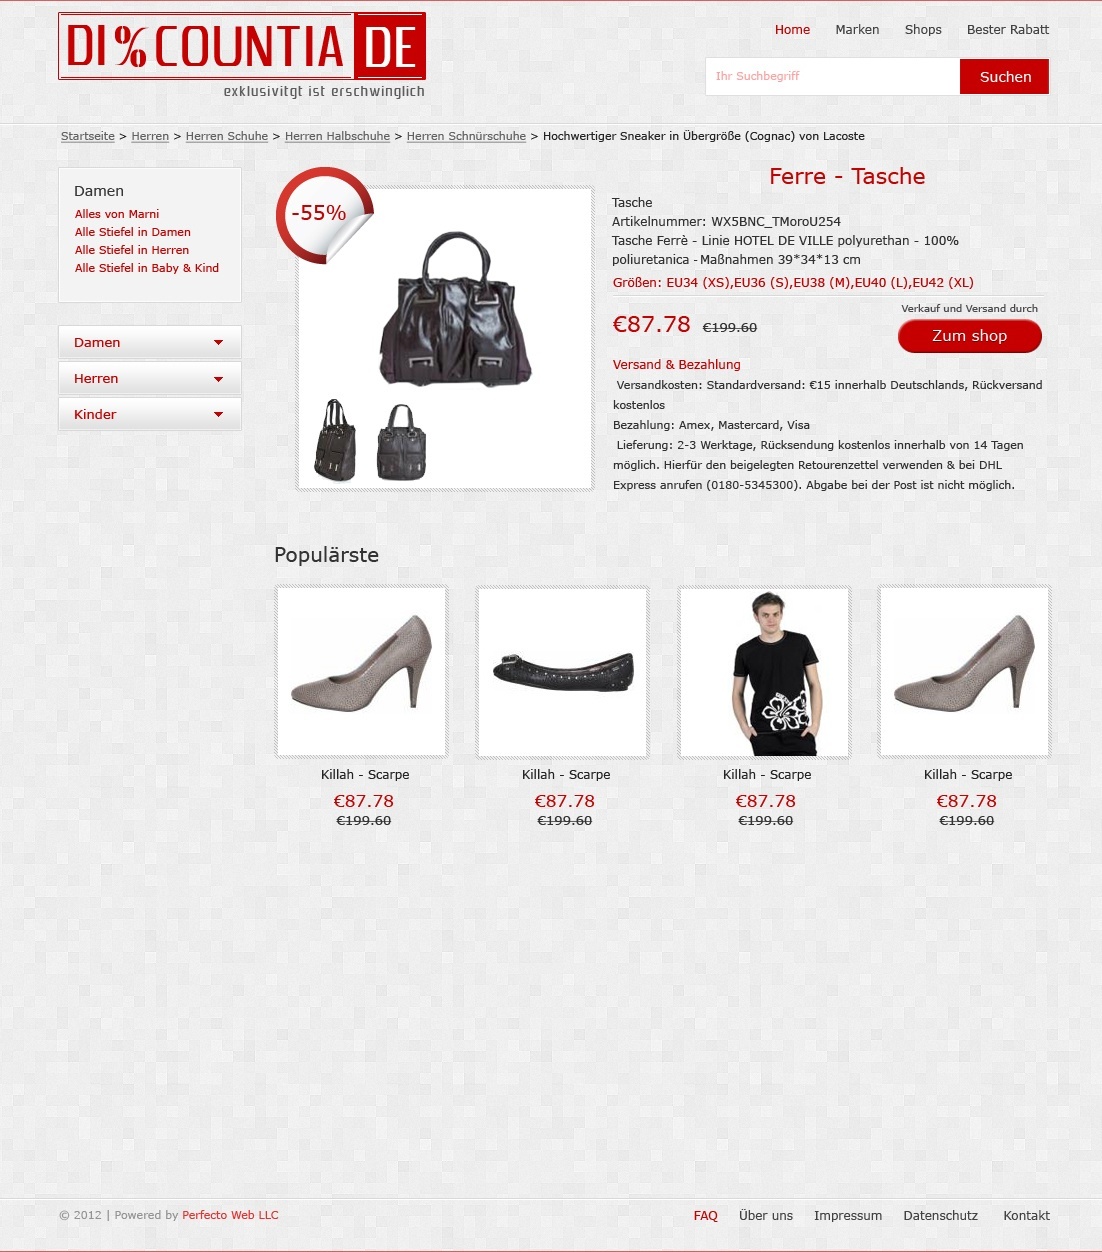 Discountia №2- Product full description page